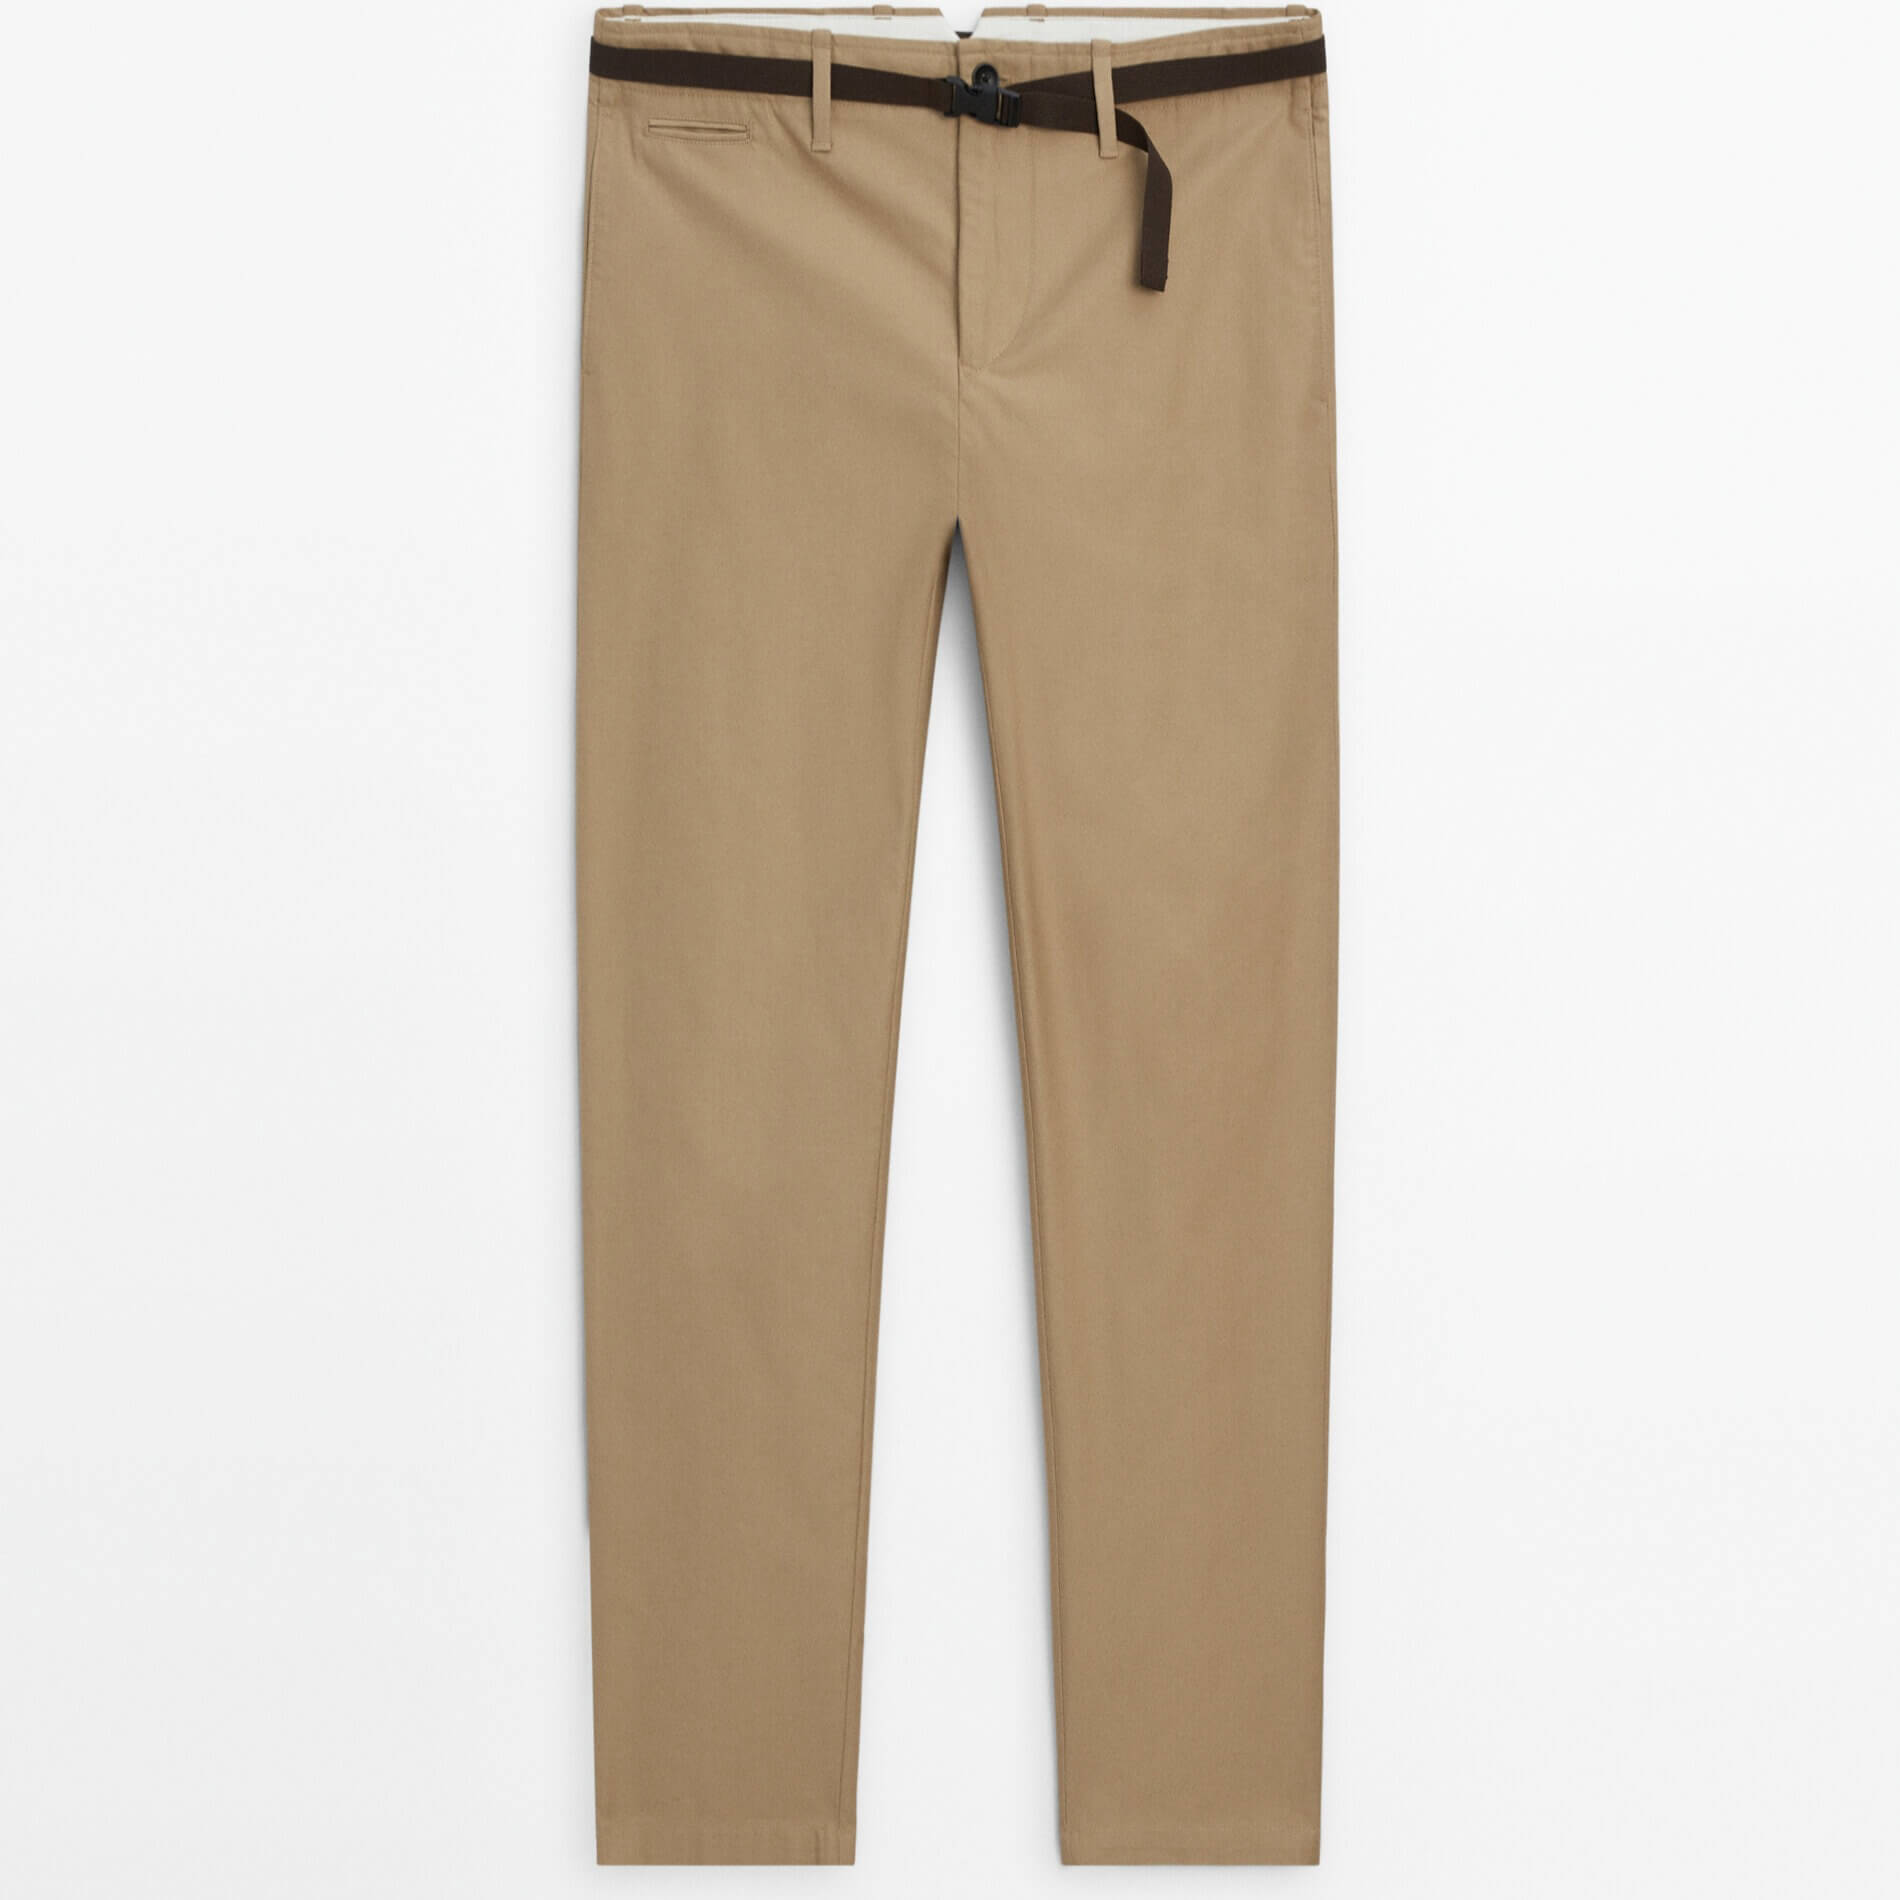 Брюки Massimo Dutti Relaxed Fit Belted Chino, бежевый фото